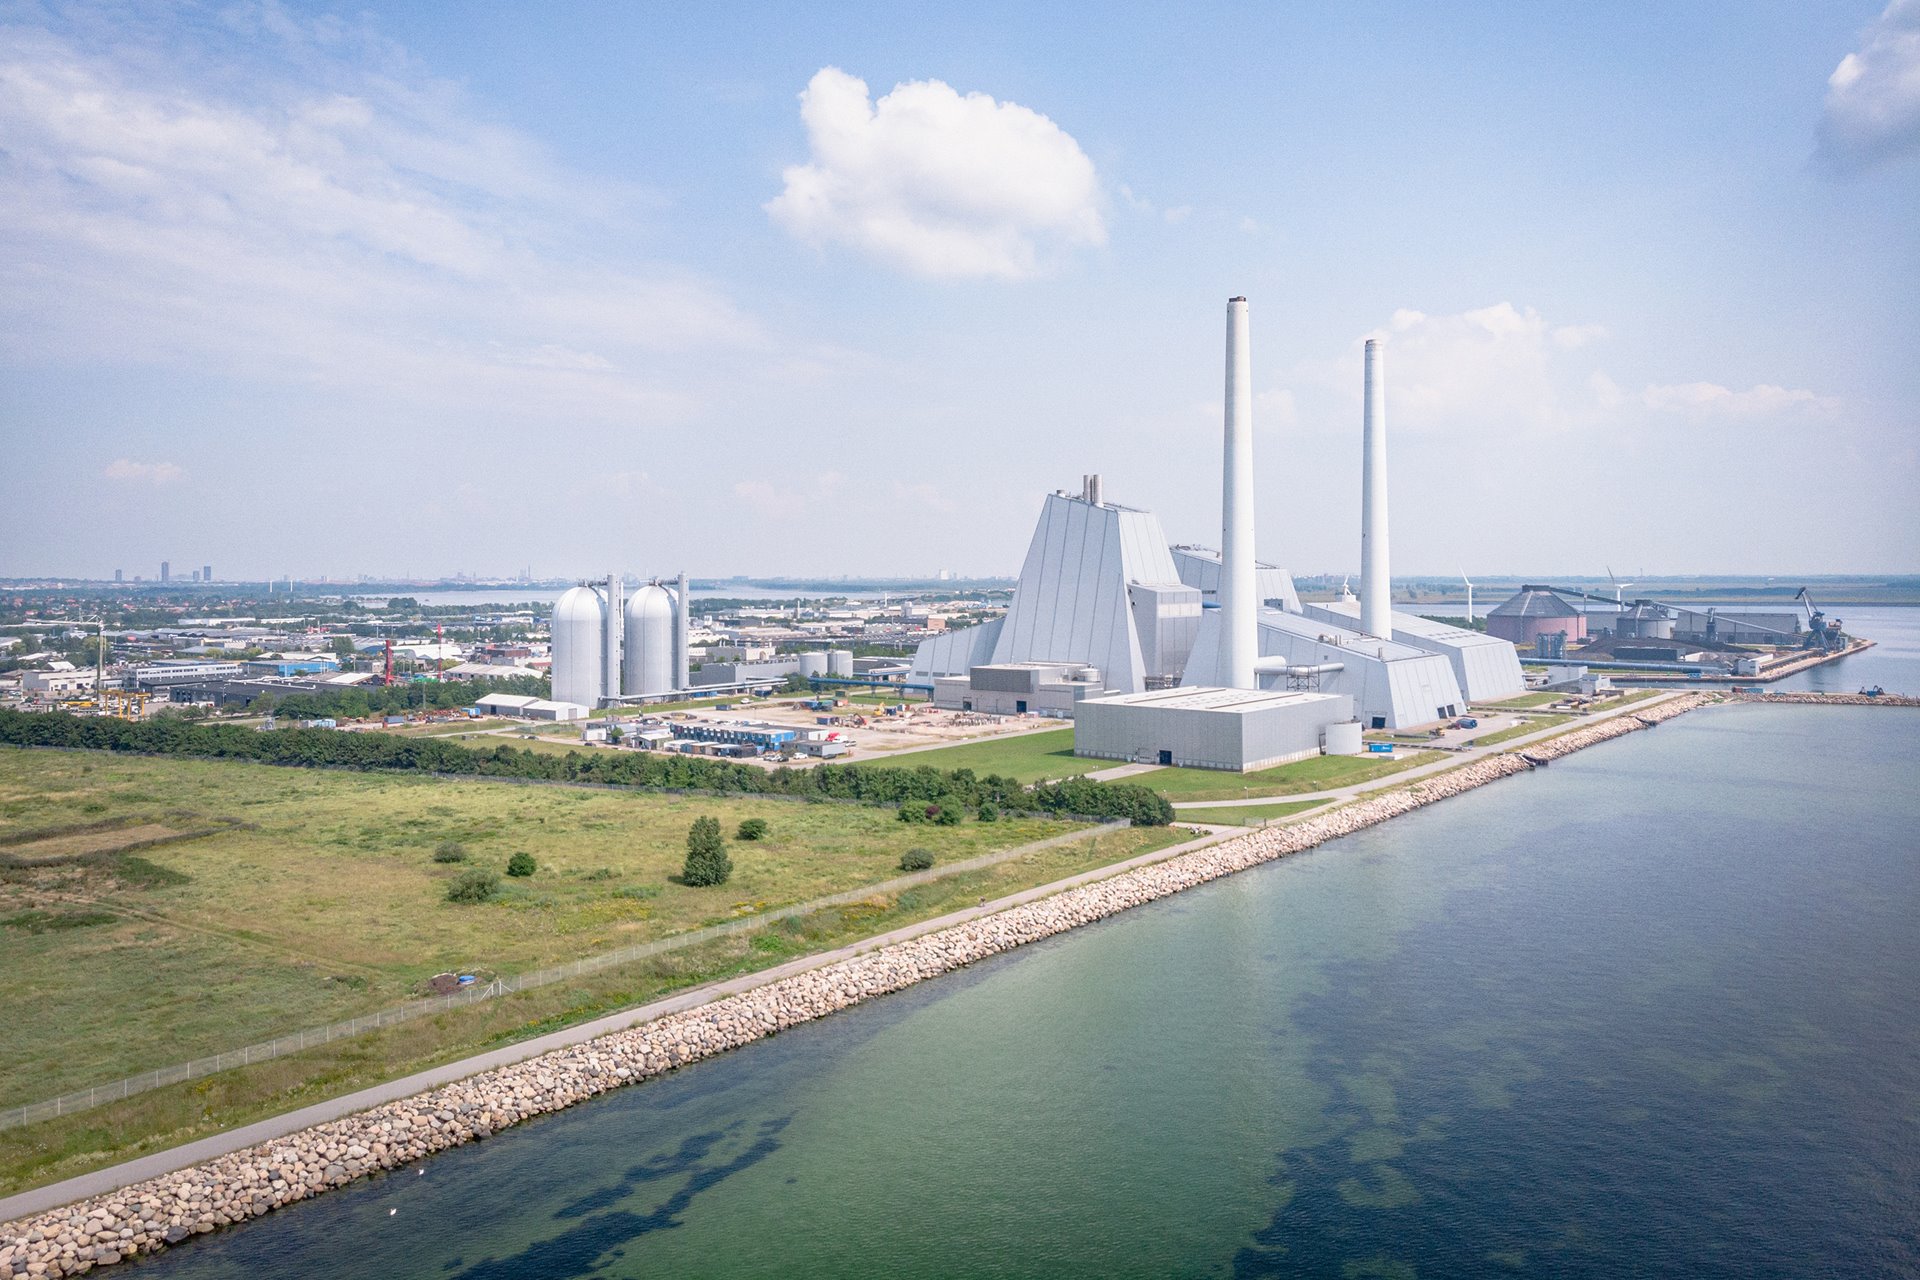 This multi-fuel power plant in Copenhagen, Denmark uses natural gas, oil, straw, and wood pellets for simultaneous generation of heat and electricity, and claims to exploit up to 94 percent of the energy in the fuels. The European Union&rsquo;s 2020 climate and energy program classifies wood pellets as a carbon-neutral form of renewable energy. Although natural gas is a non-renewable fossil fuel, the plant aims to replace nearly a half of its gas consumption with wood pellets.